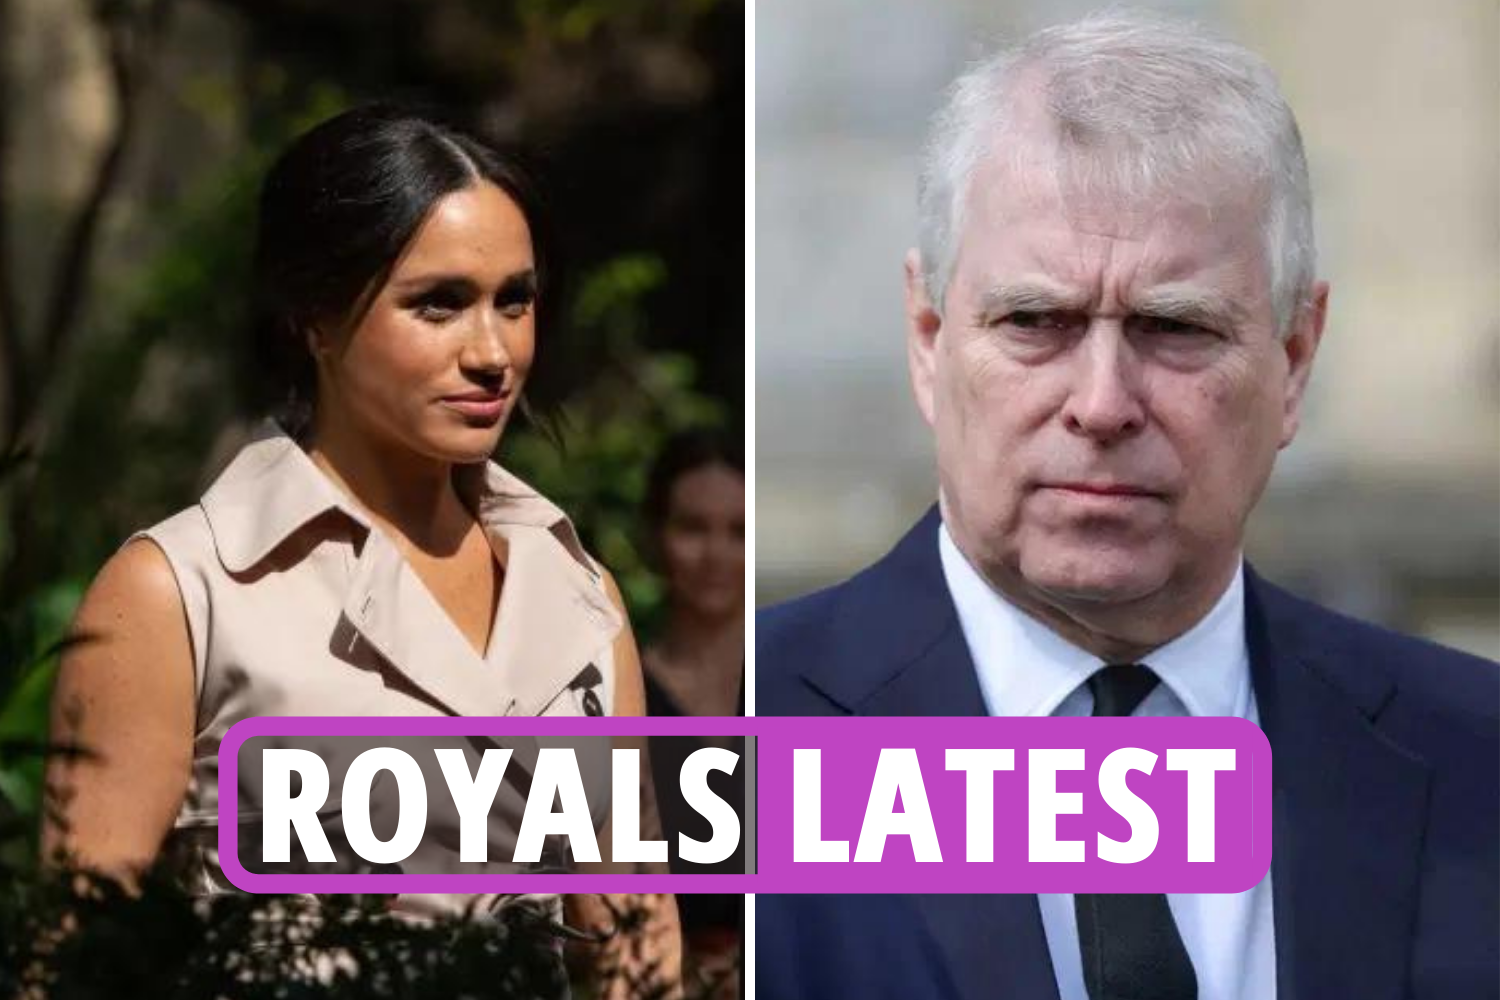 Andrew ‘selling’ £17m chalet as Palace ‘bent backwards’ to help Meghan